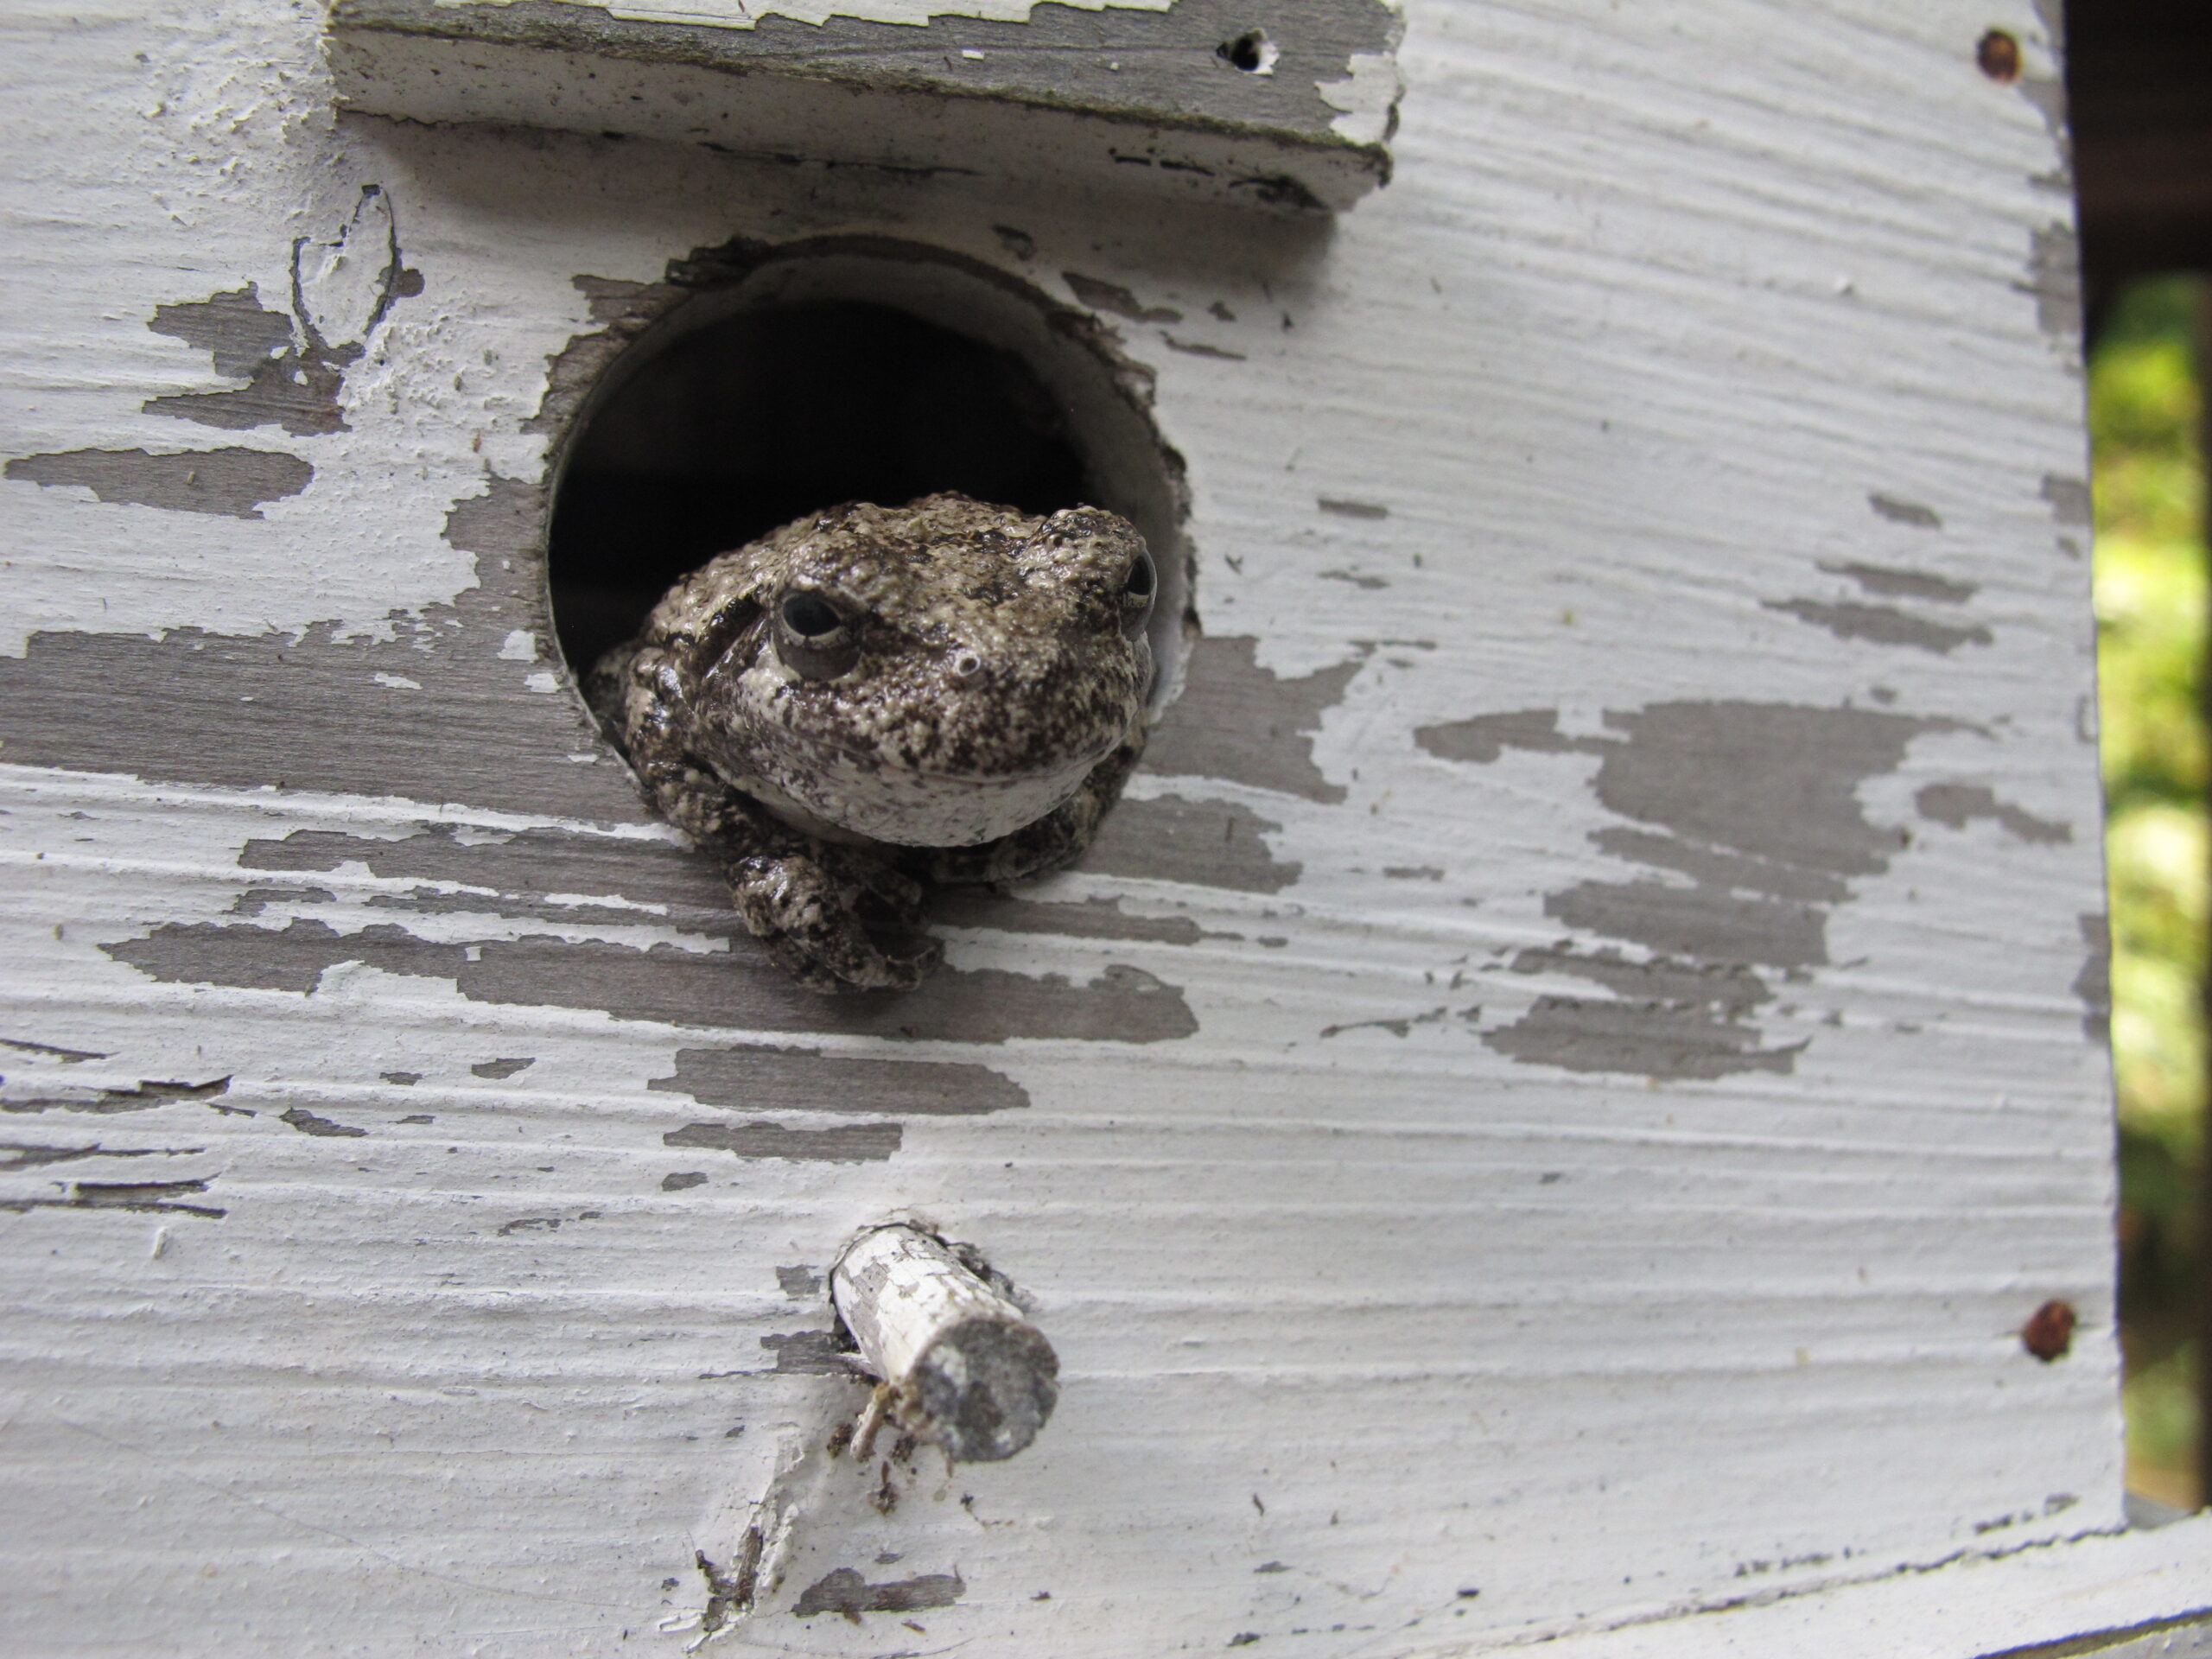 Should you build backyard frog homes? Absolutely, says Wisconsin amphibians researcher